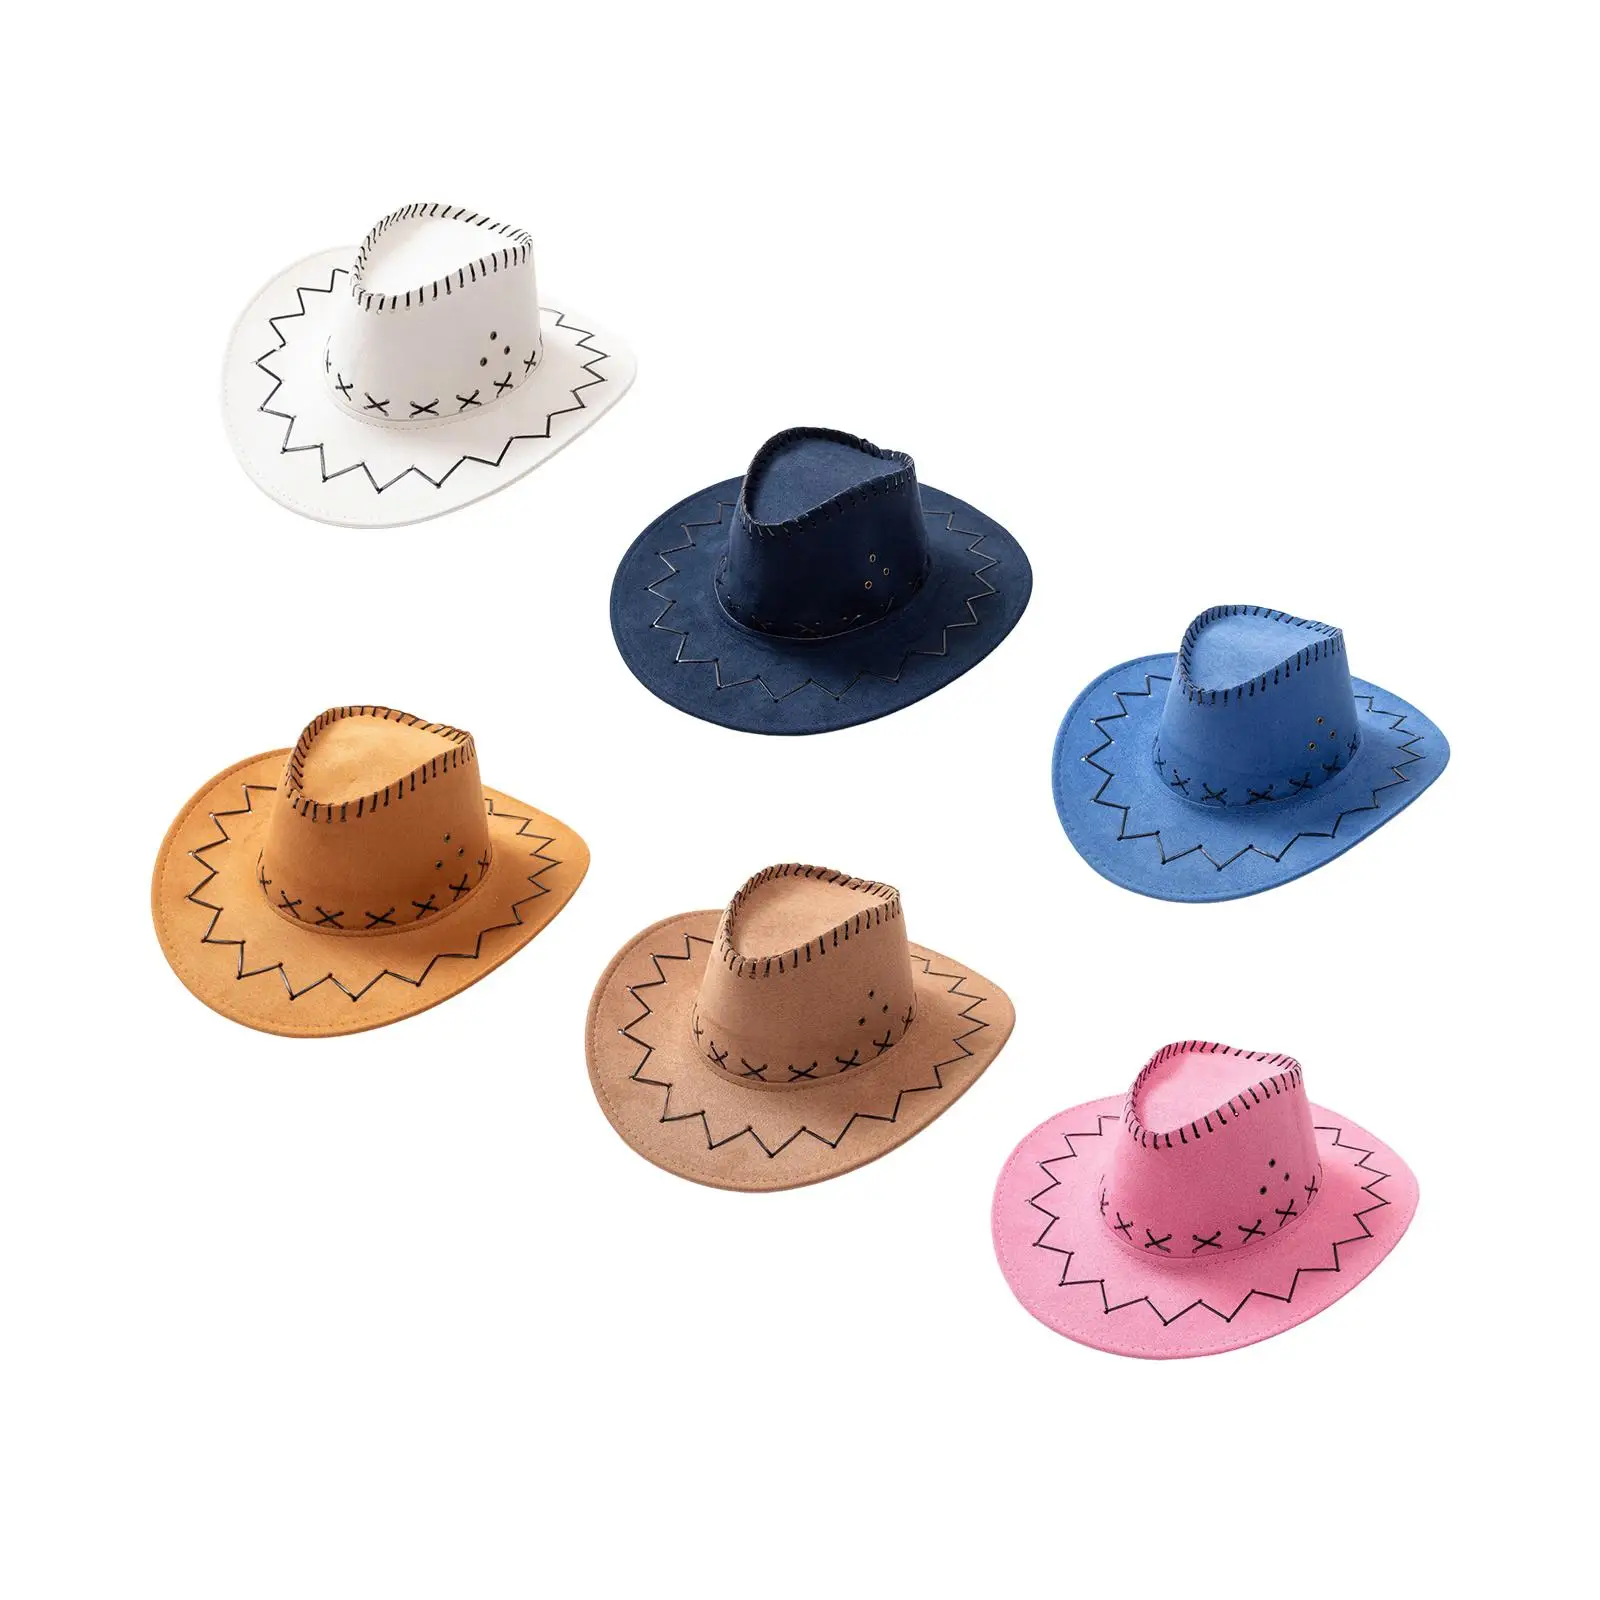 Suede  Hat Western Style with Inner Circumference 58cm Sturdy Adjustable Chin Strap Stylish for  Themed Party